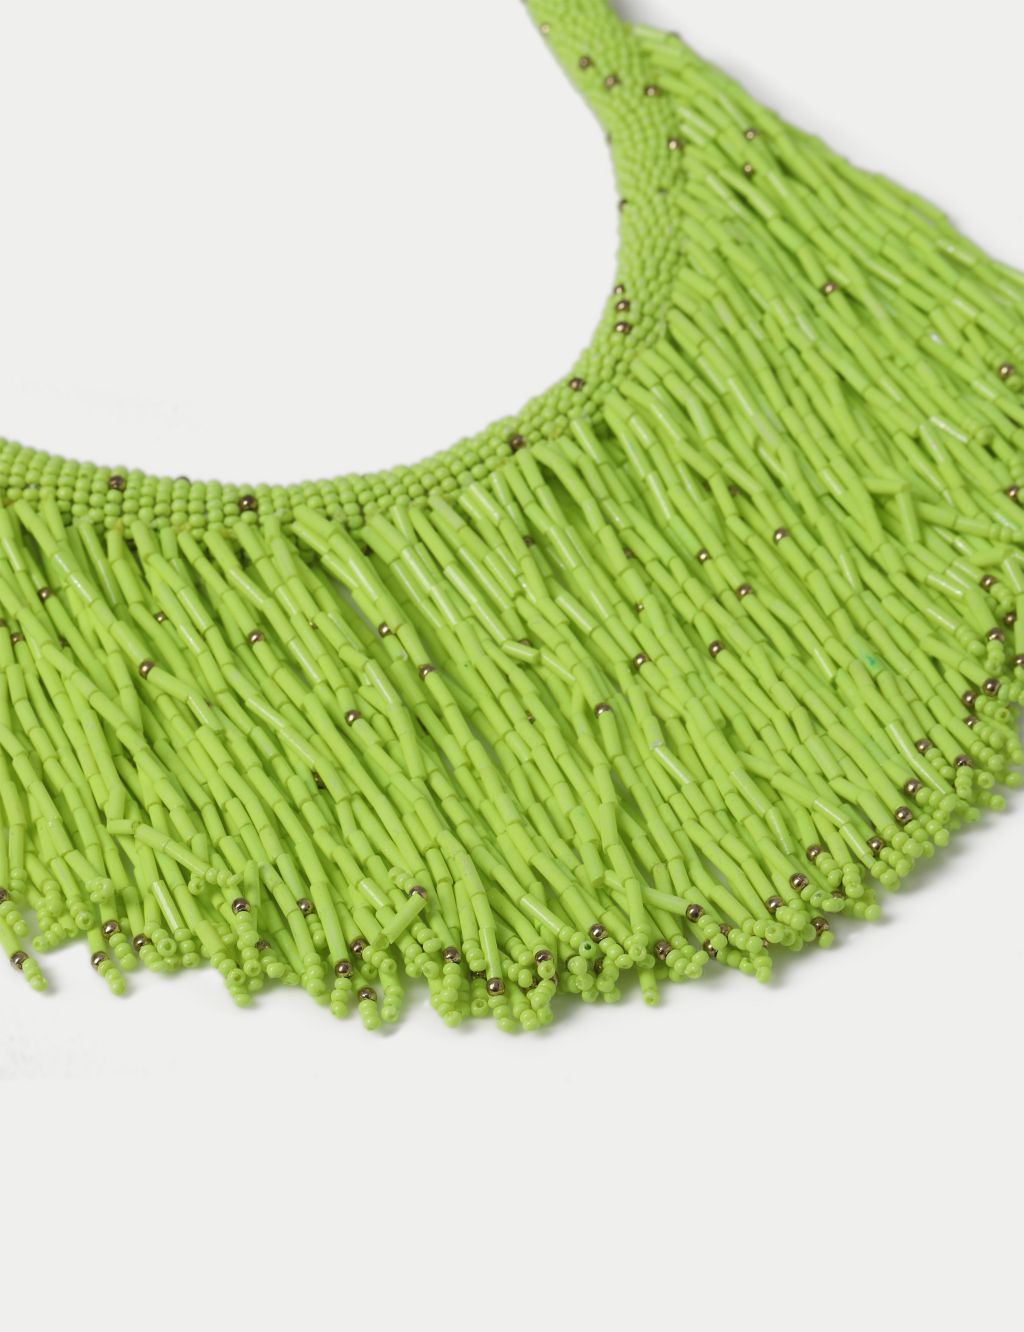 Lime Green Tassel Necklace